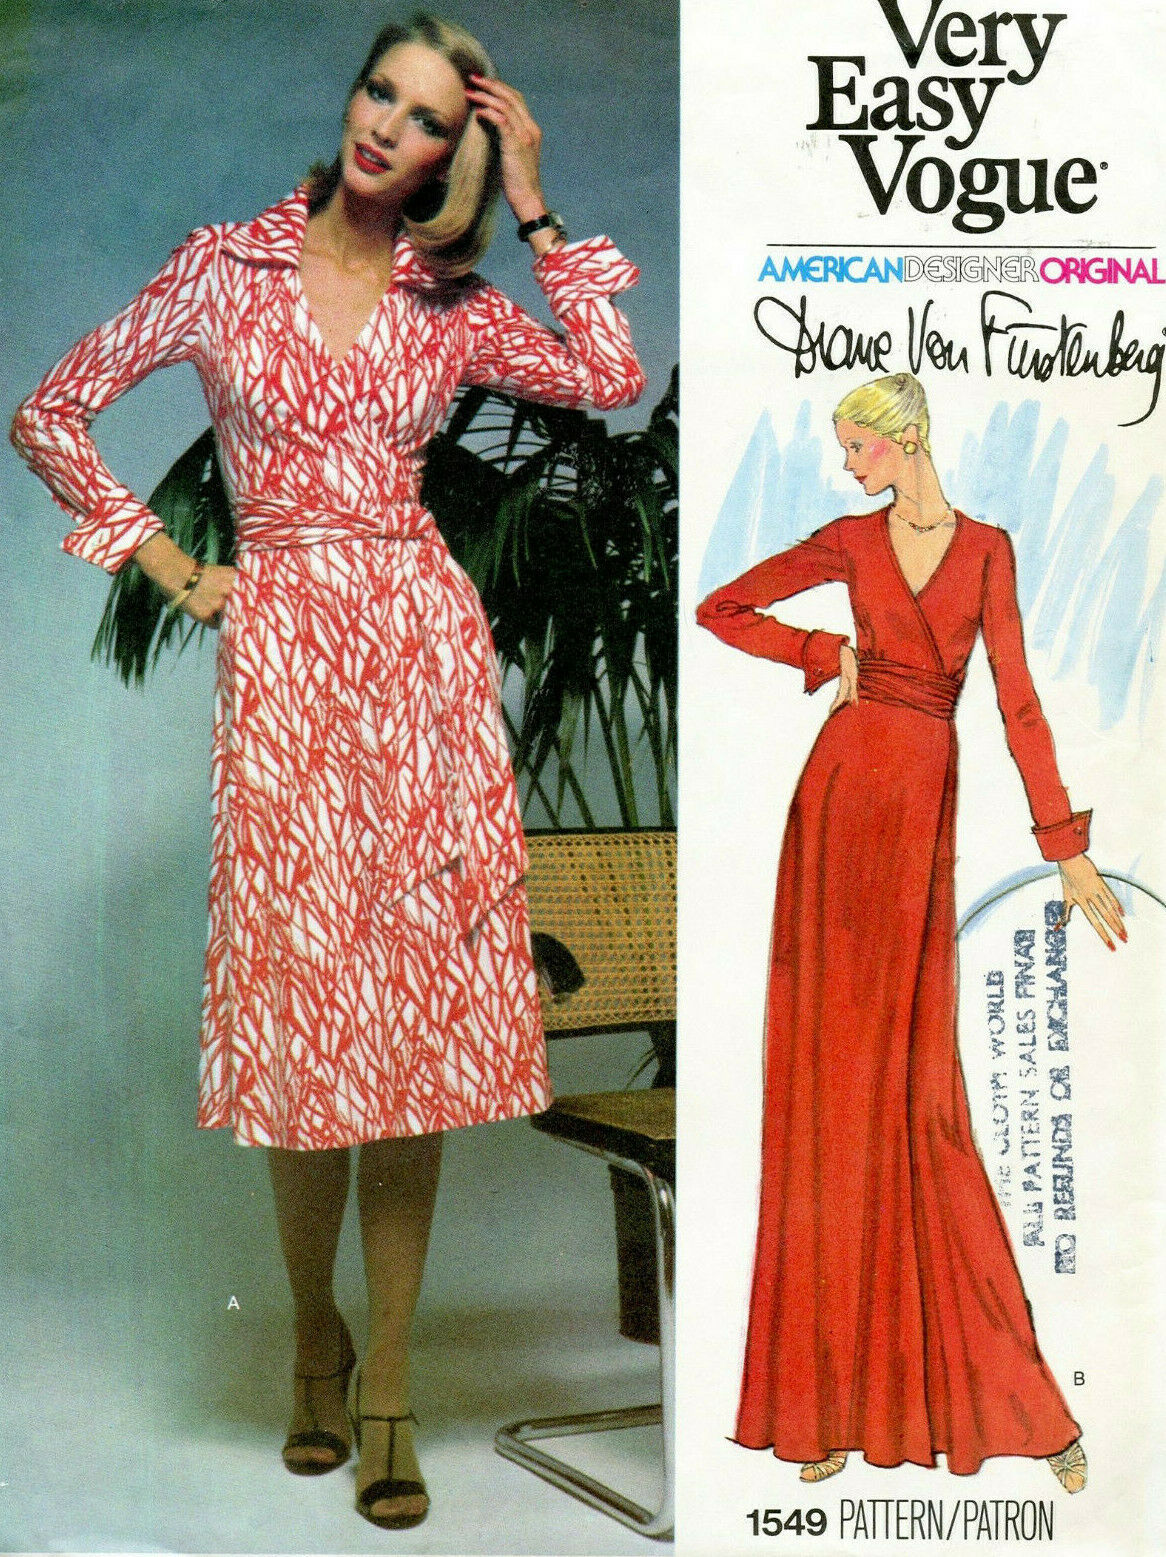 Vintage 70s/80s Sewing Patterns/ Vintage Sewing//70s Dress/ 80s Outfits/  Patterns/ 